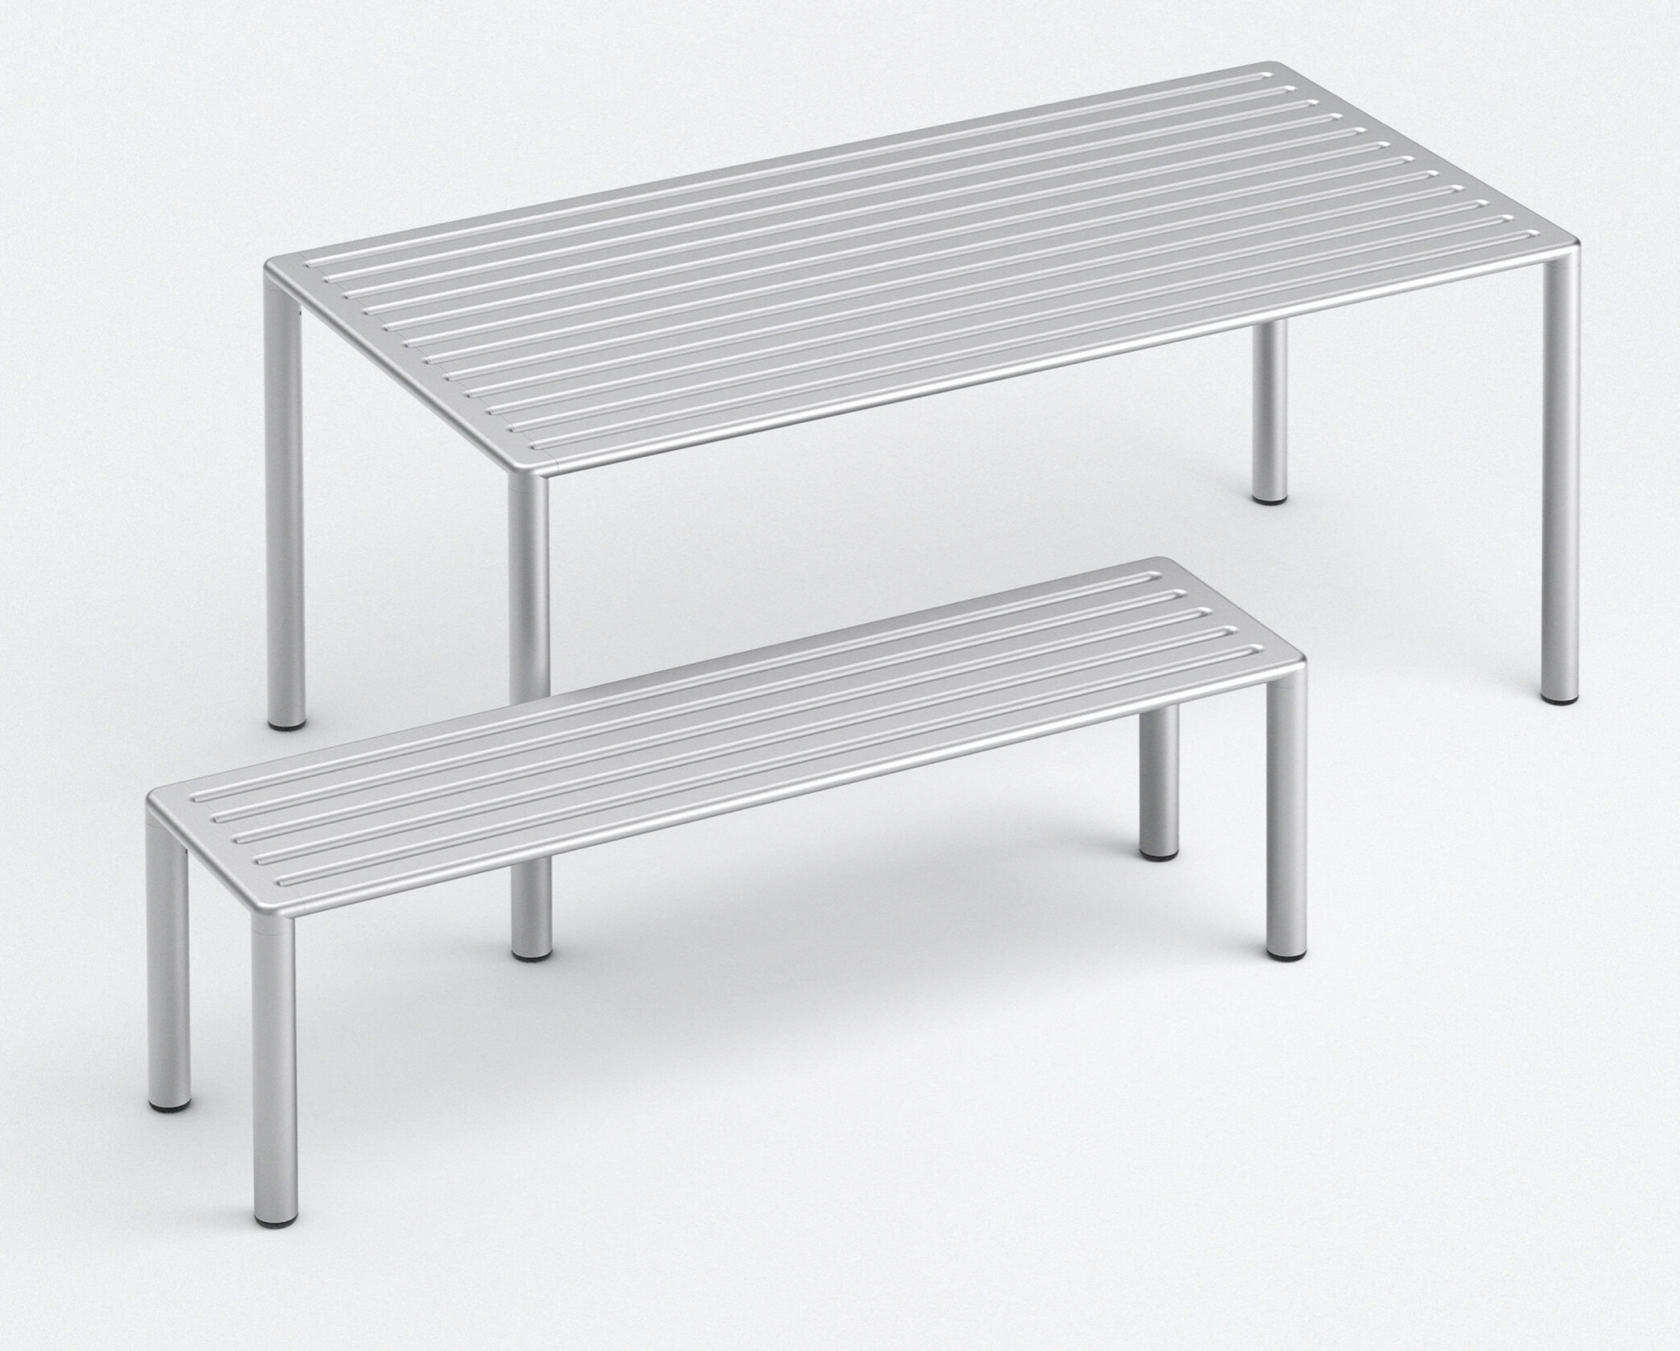 Table EASY ALUMINIUM 1196 by embru